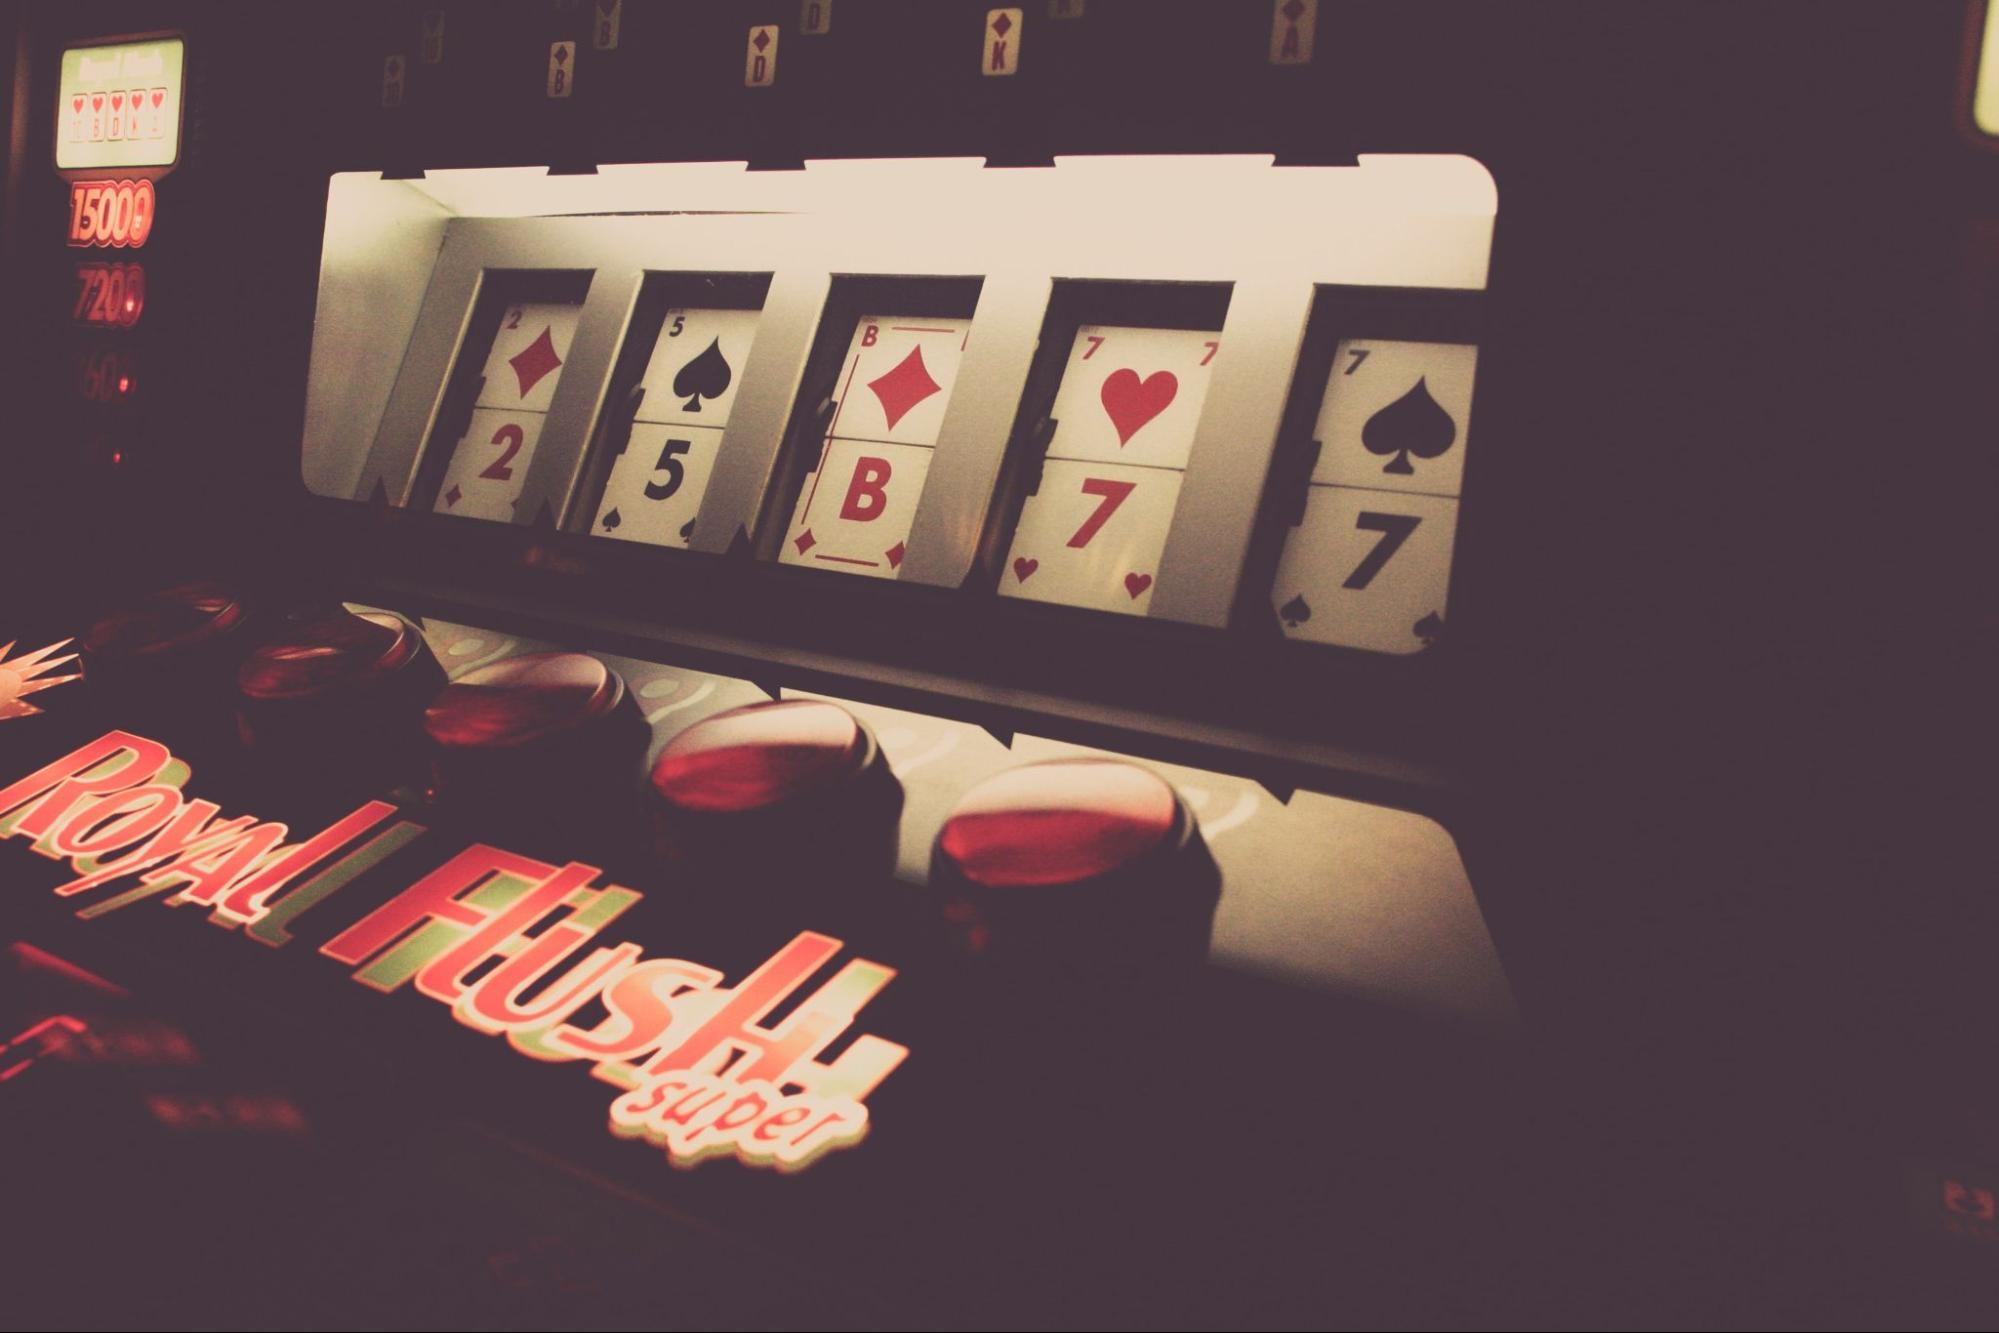 Understanding Casino Odds: How to Calculate Probabilities and Improve Your Chances -